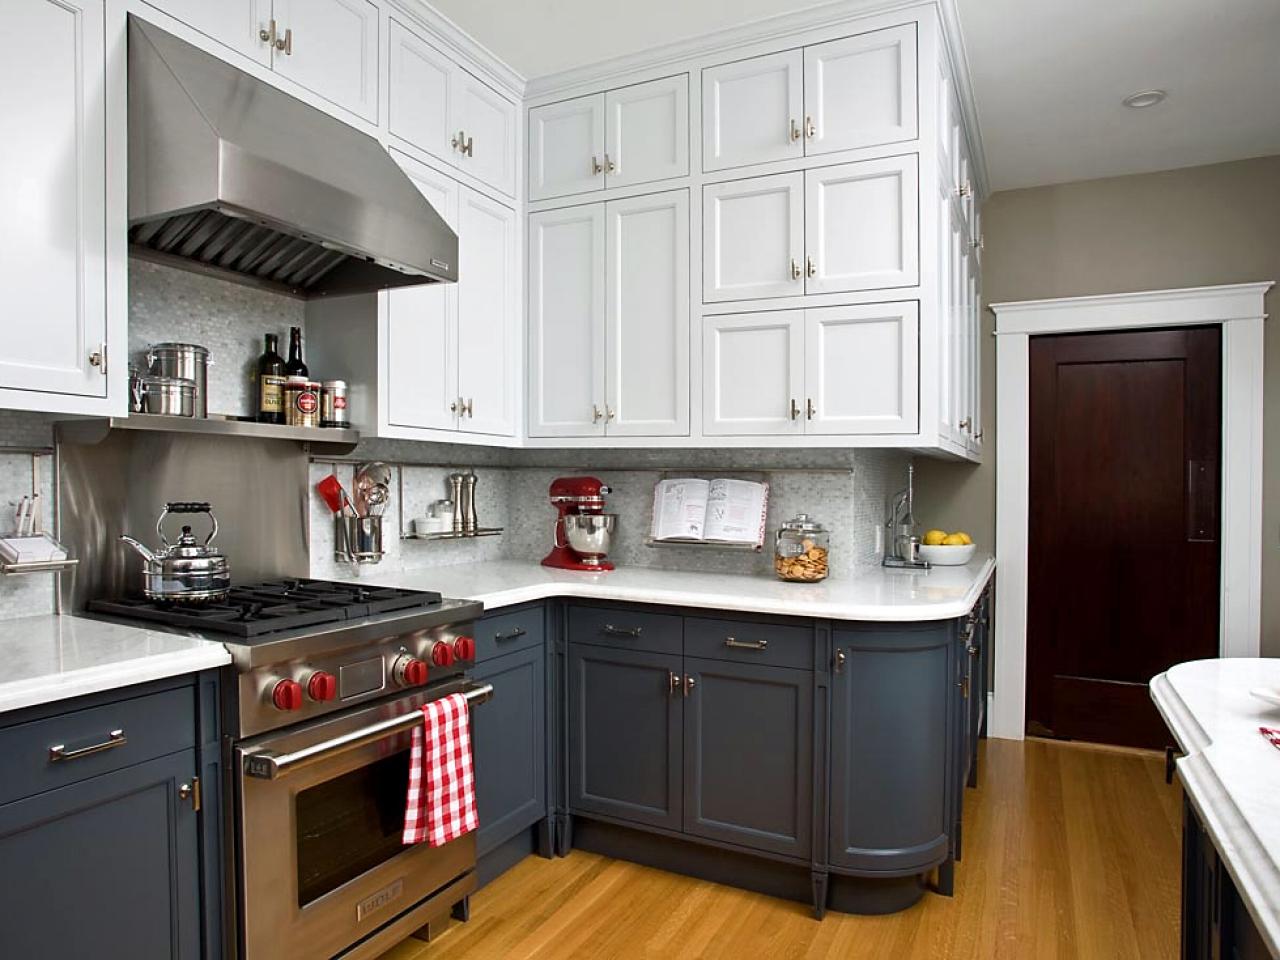 2 Toned Kitchen Cabinets